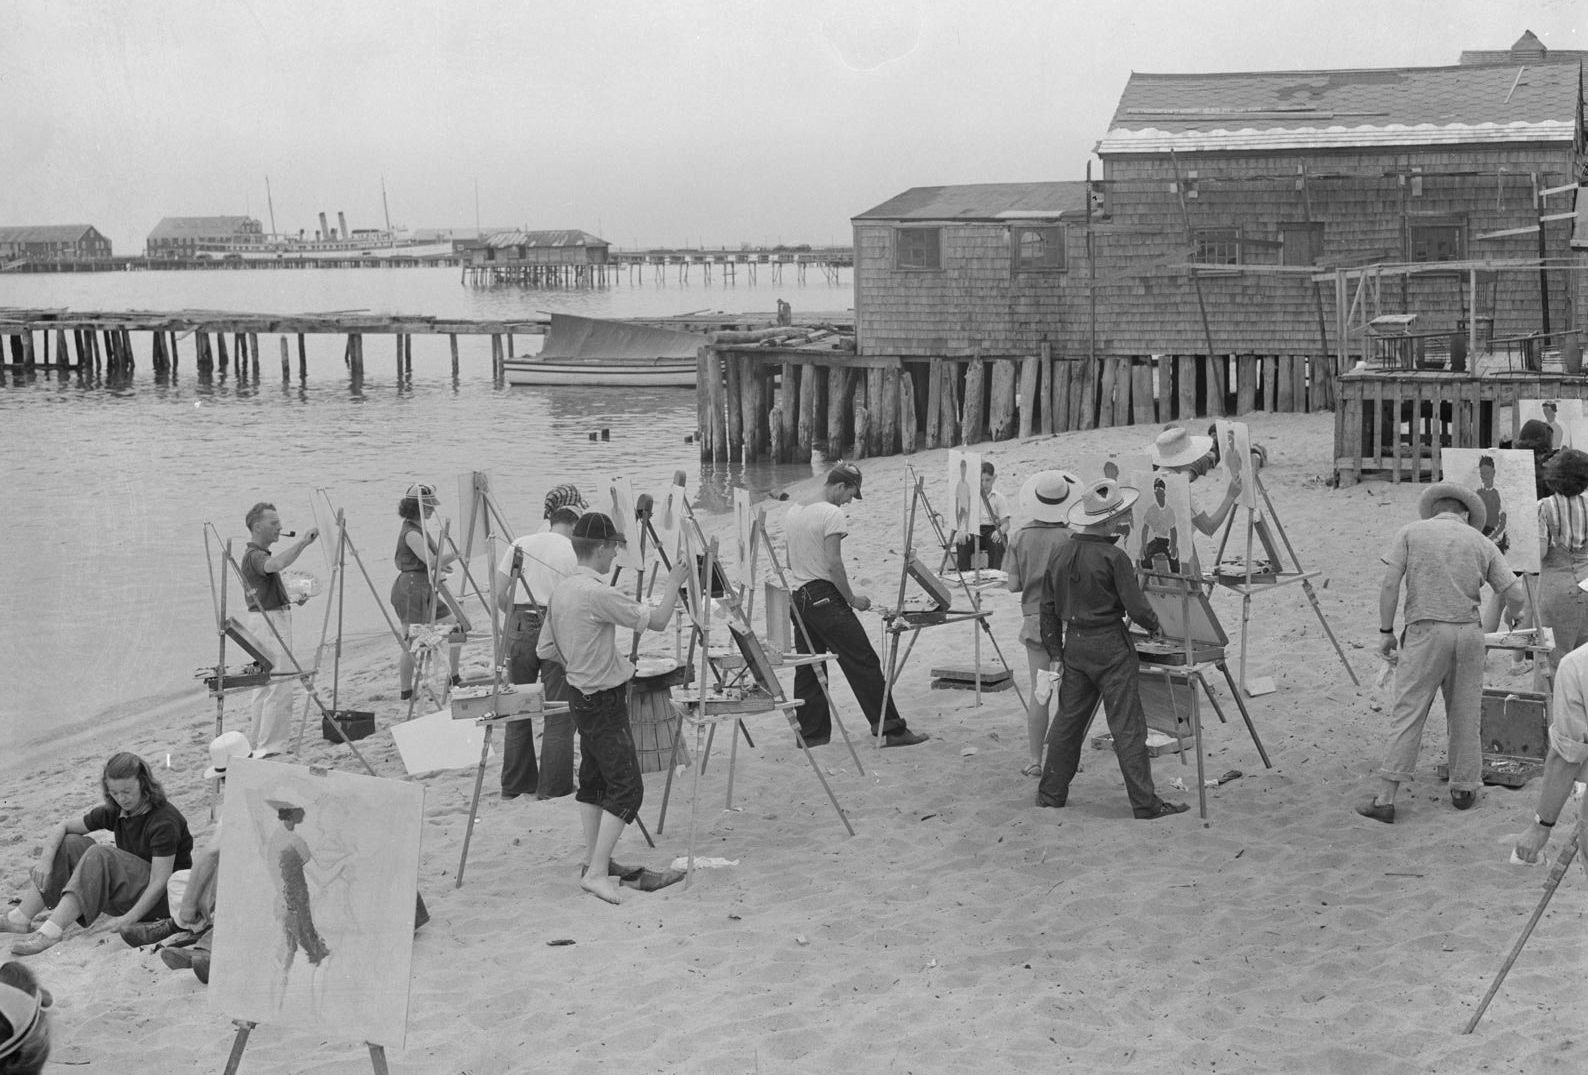 painters in provincetown on the beach vintage photograph e1568313151656